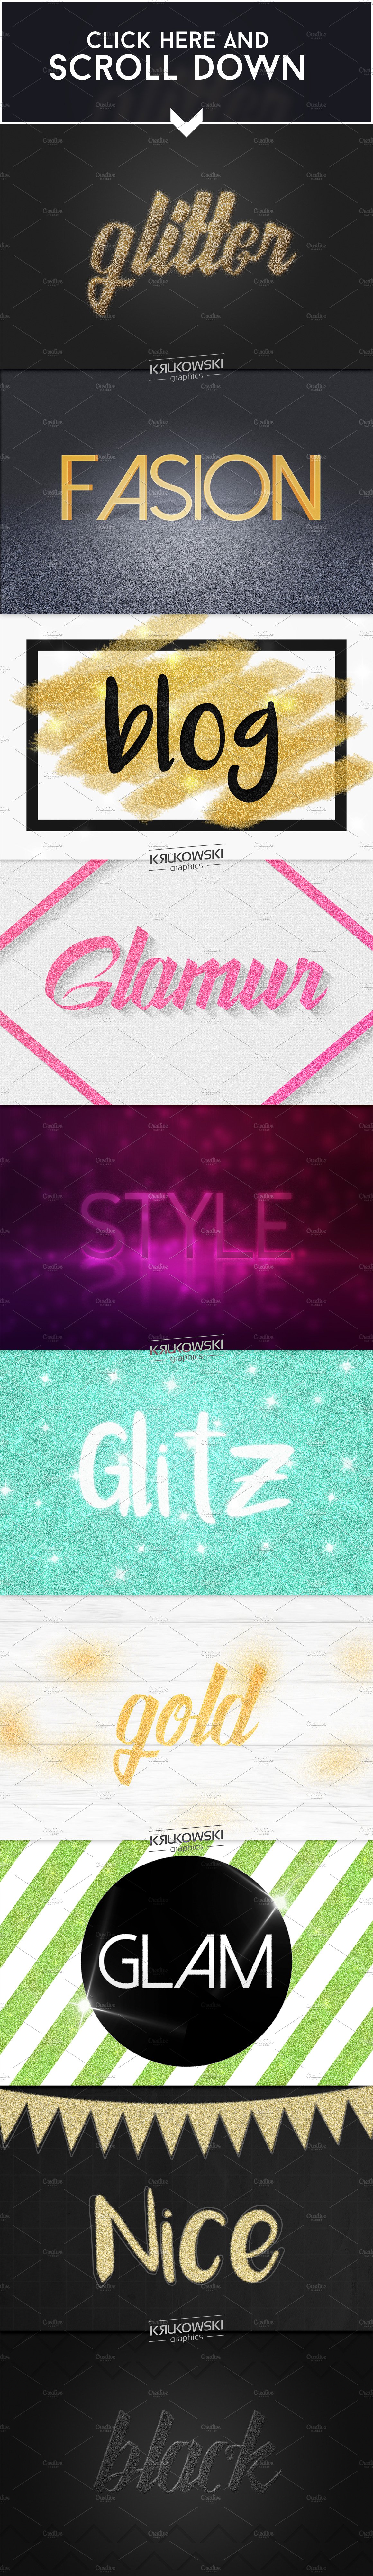 Glitter Text Effectpreview image.